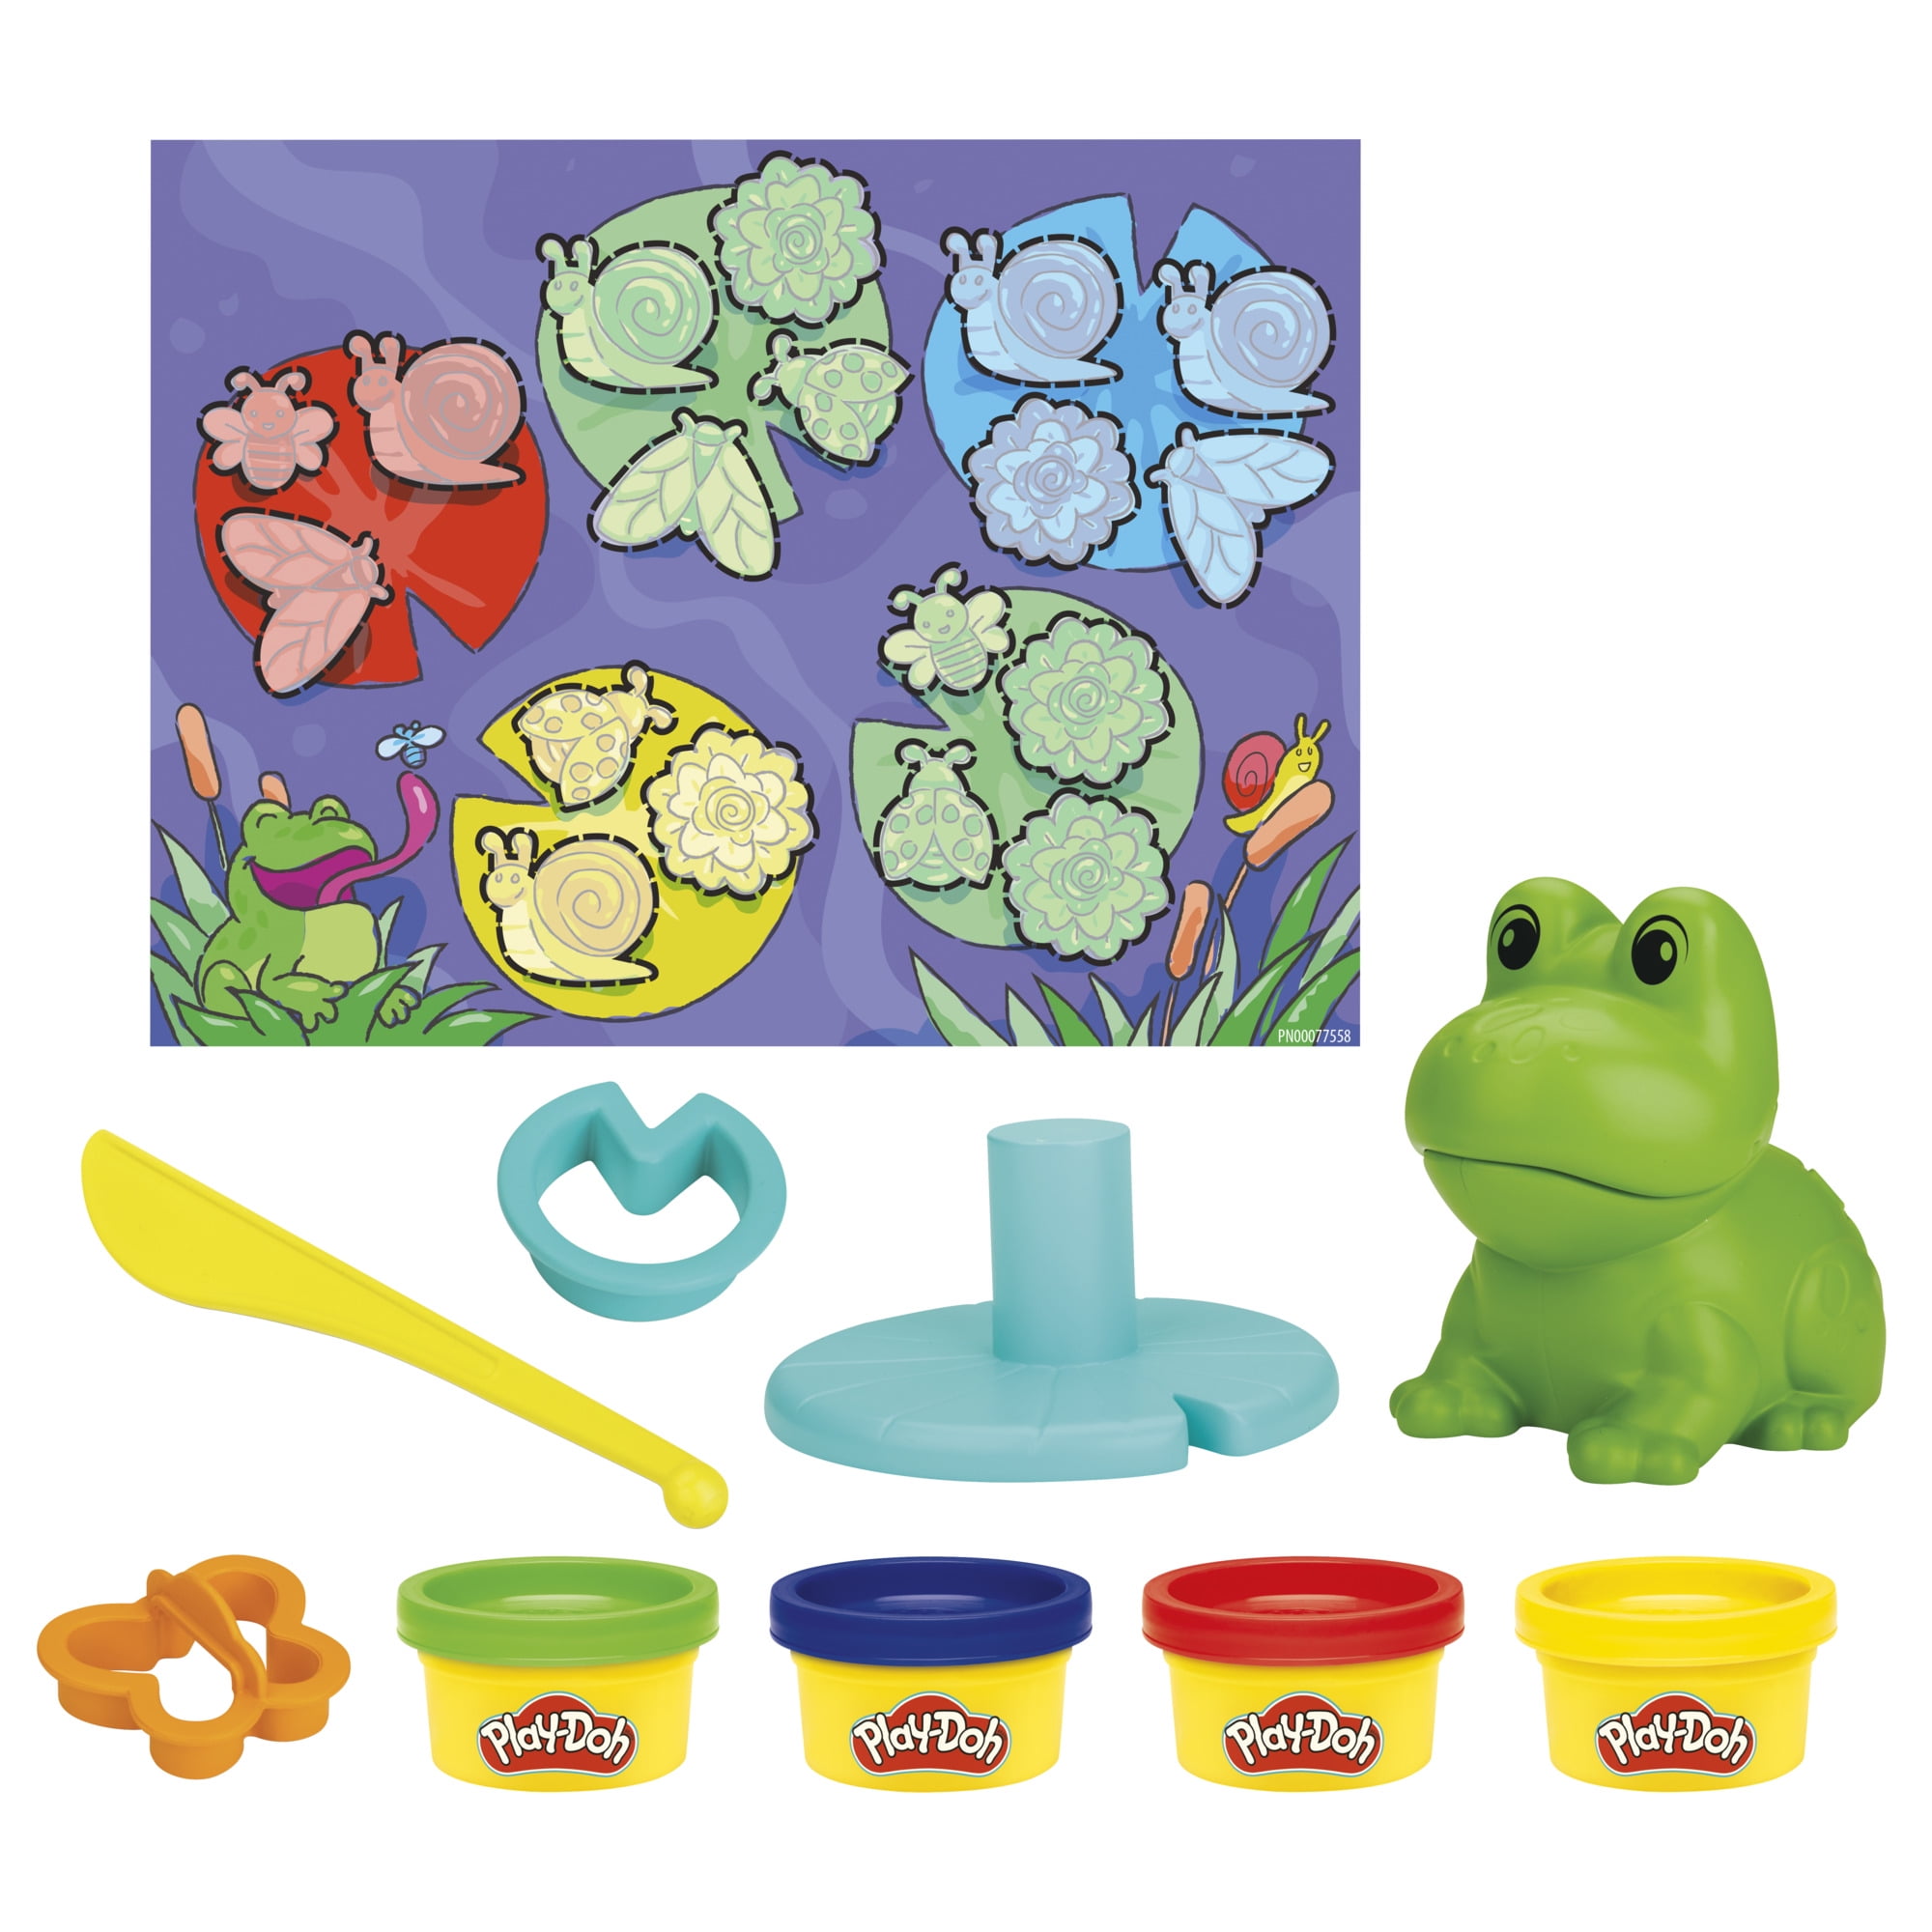 Baby Products Online - Play-Doh Bulk Spring Colors of non-toxic